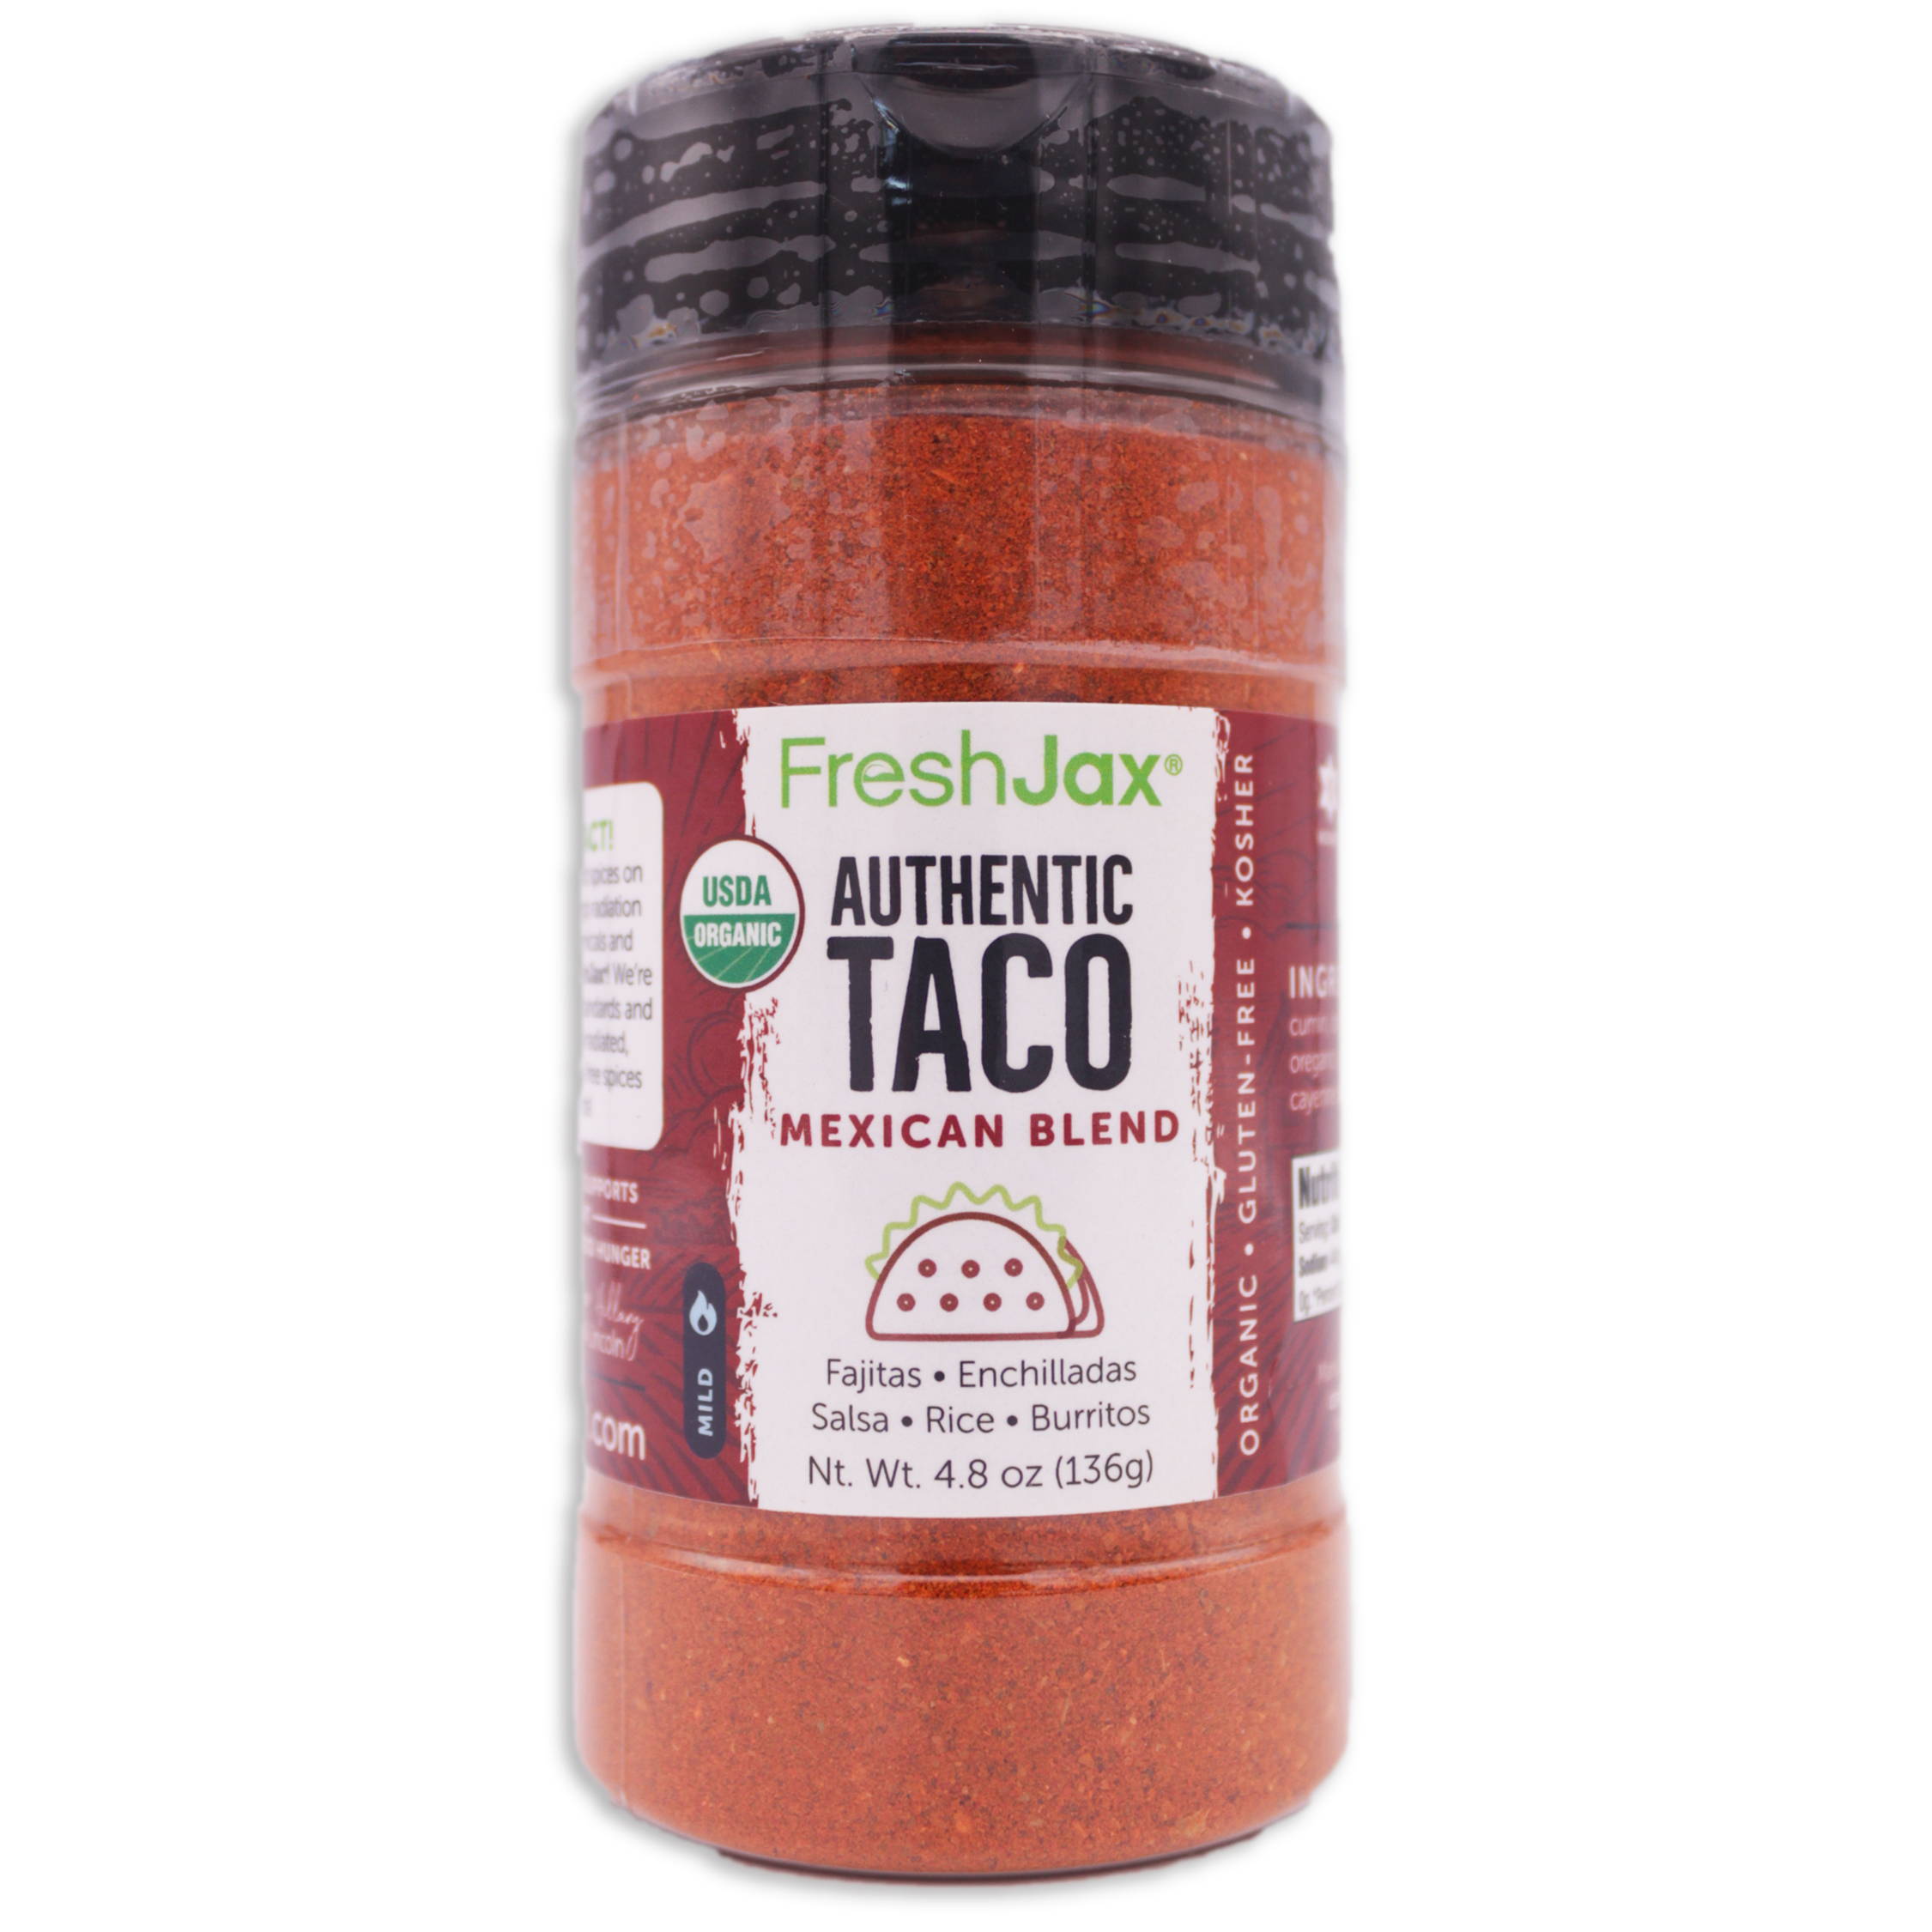 FreshJax Organic Spices Taco Mexican Blend large bottle